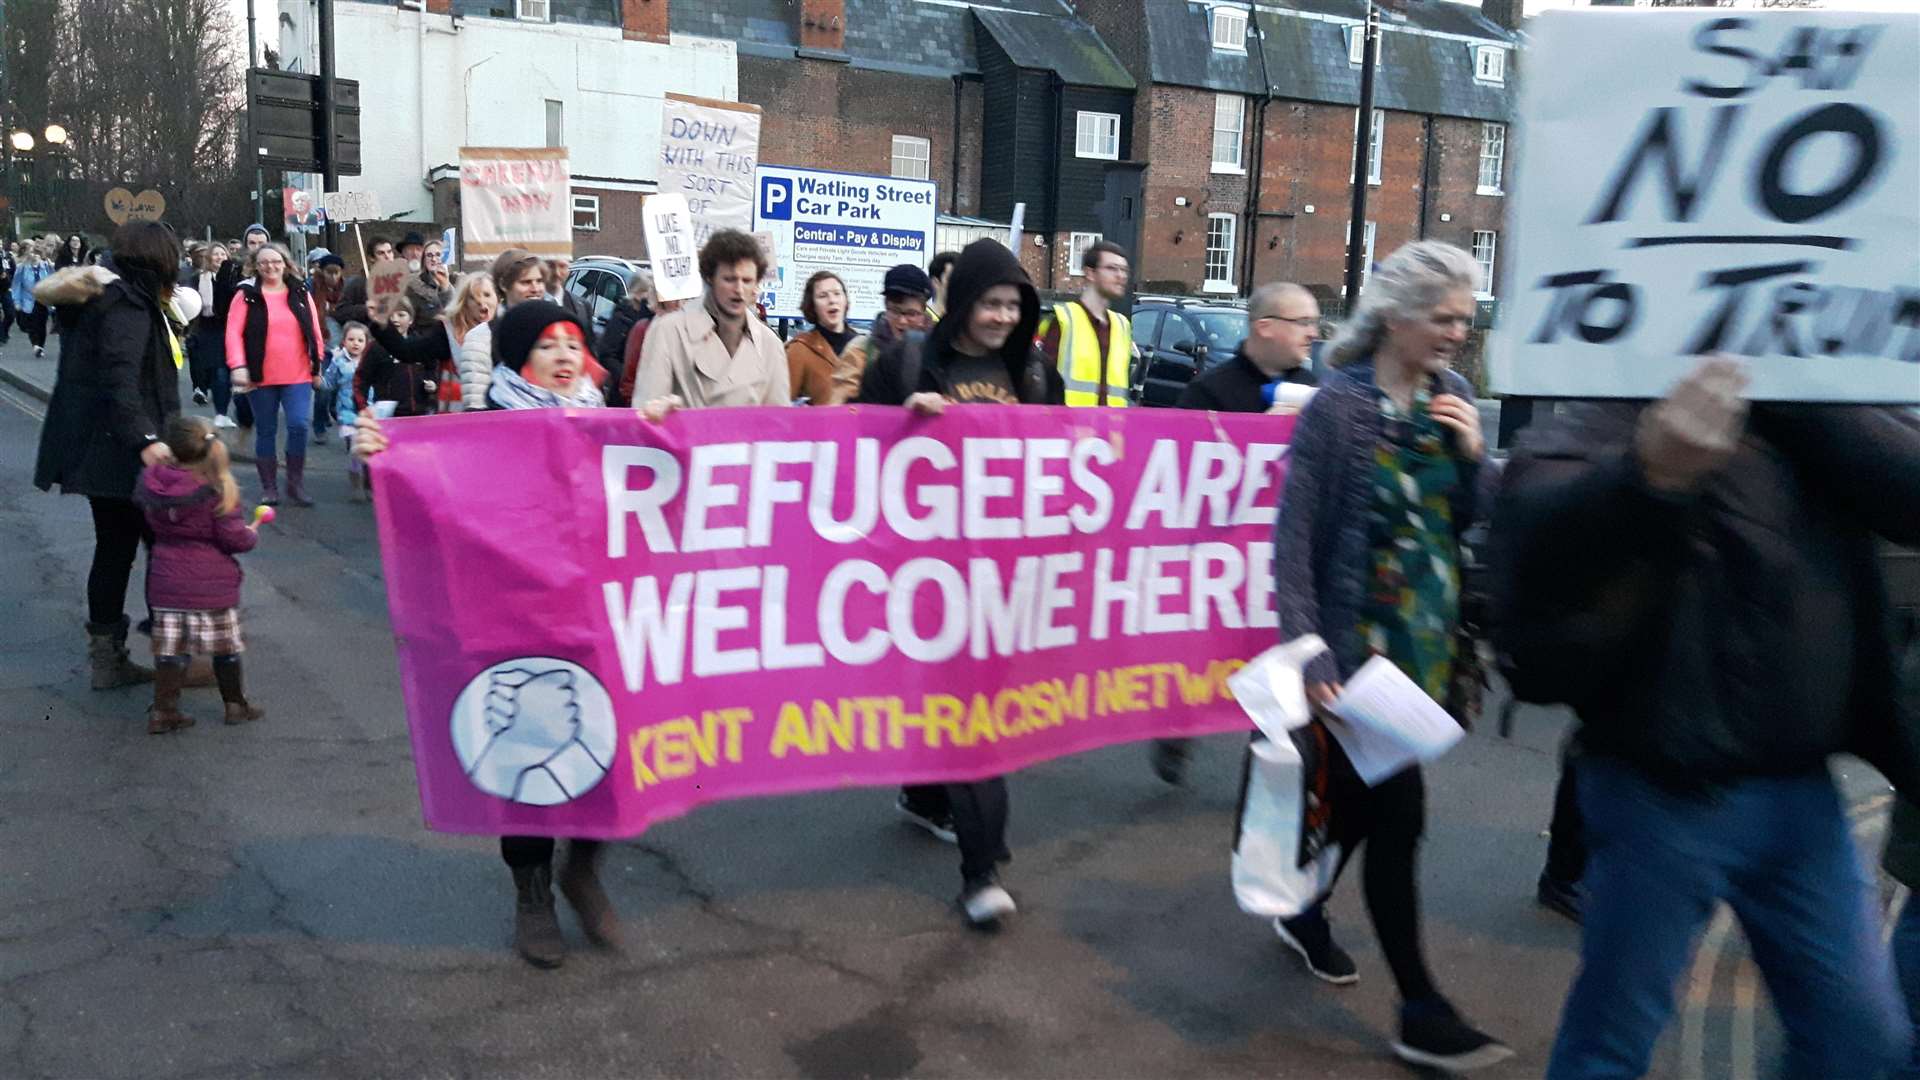 Anti-Trump demonstrators marched through Canterbury in March last year